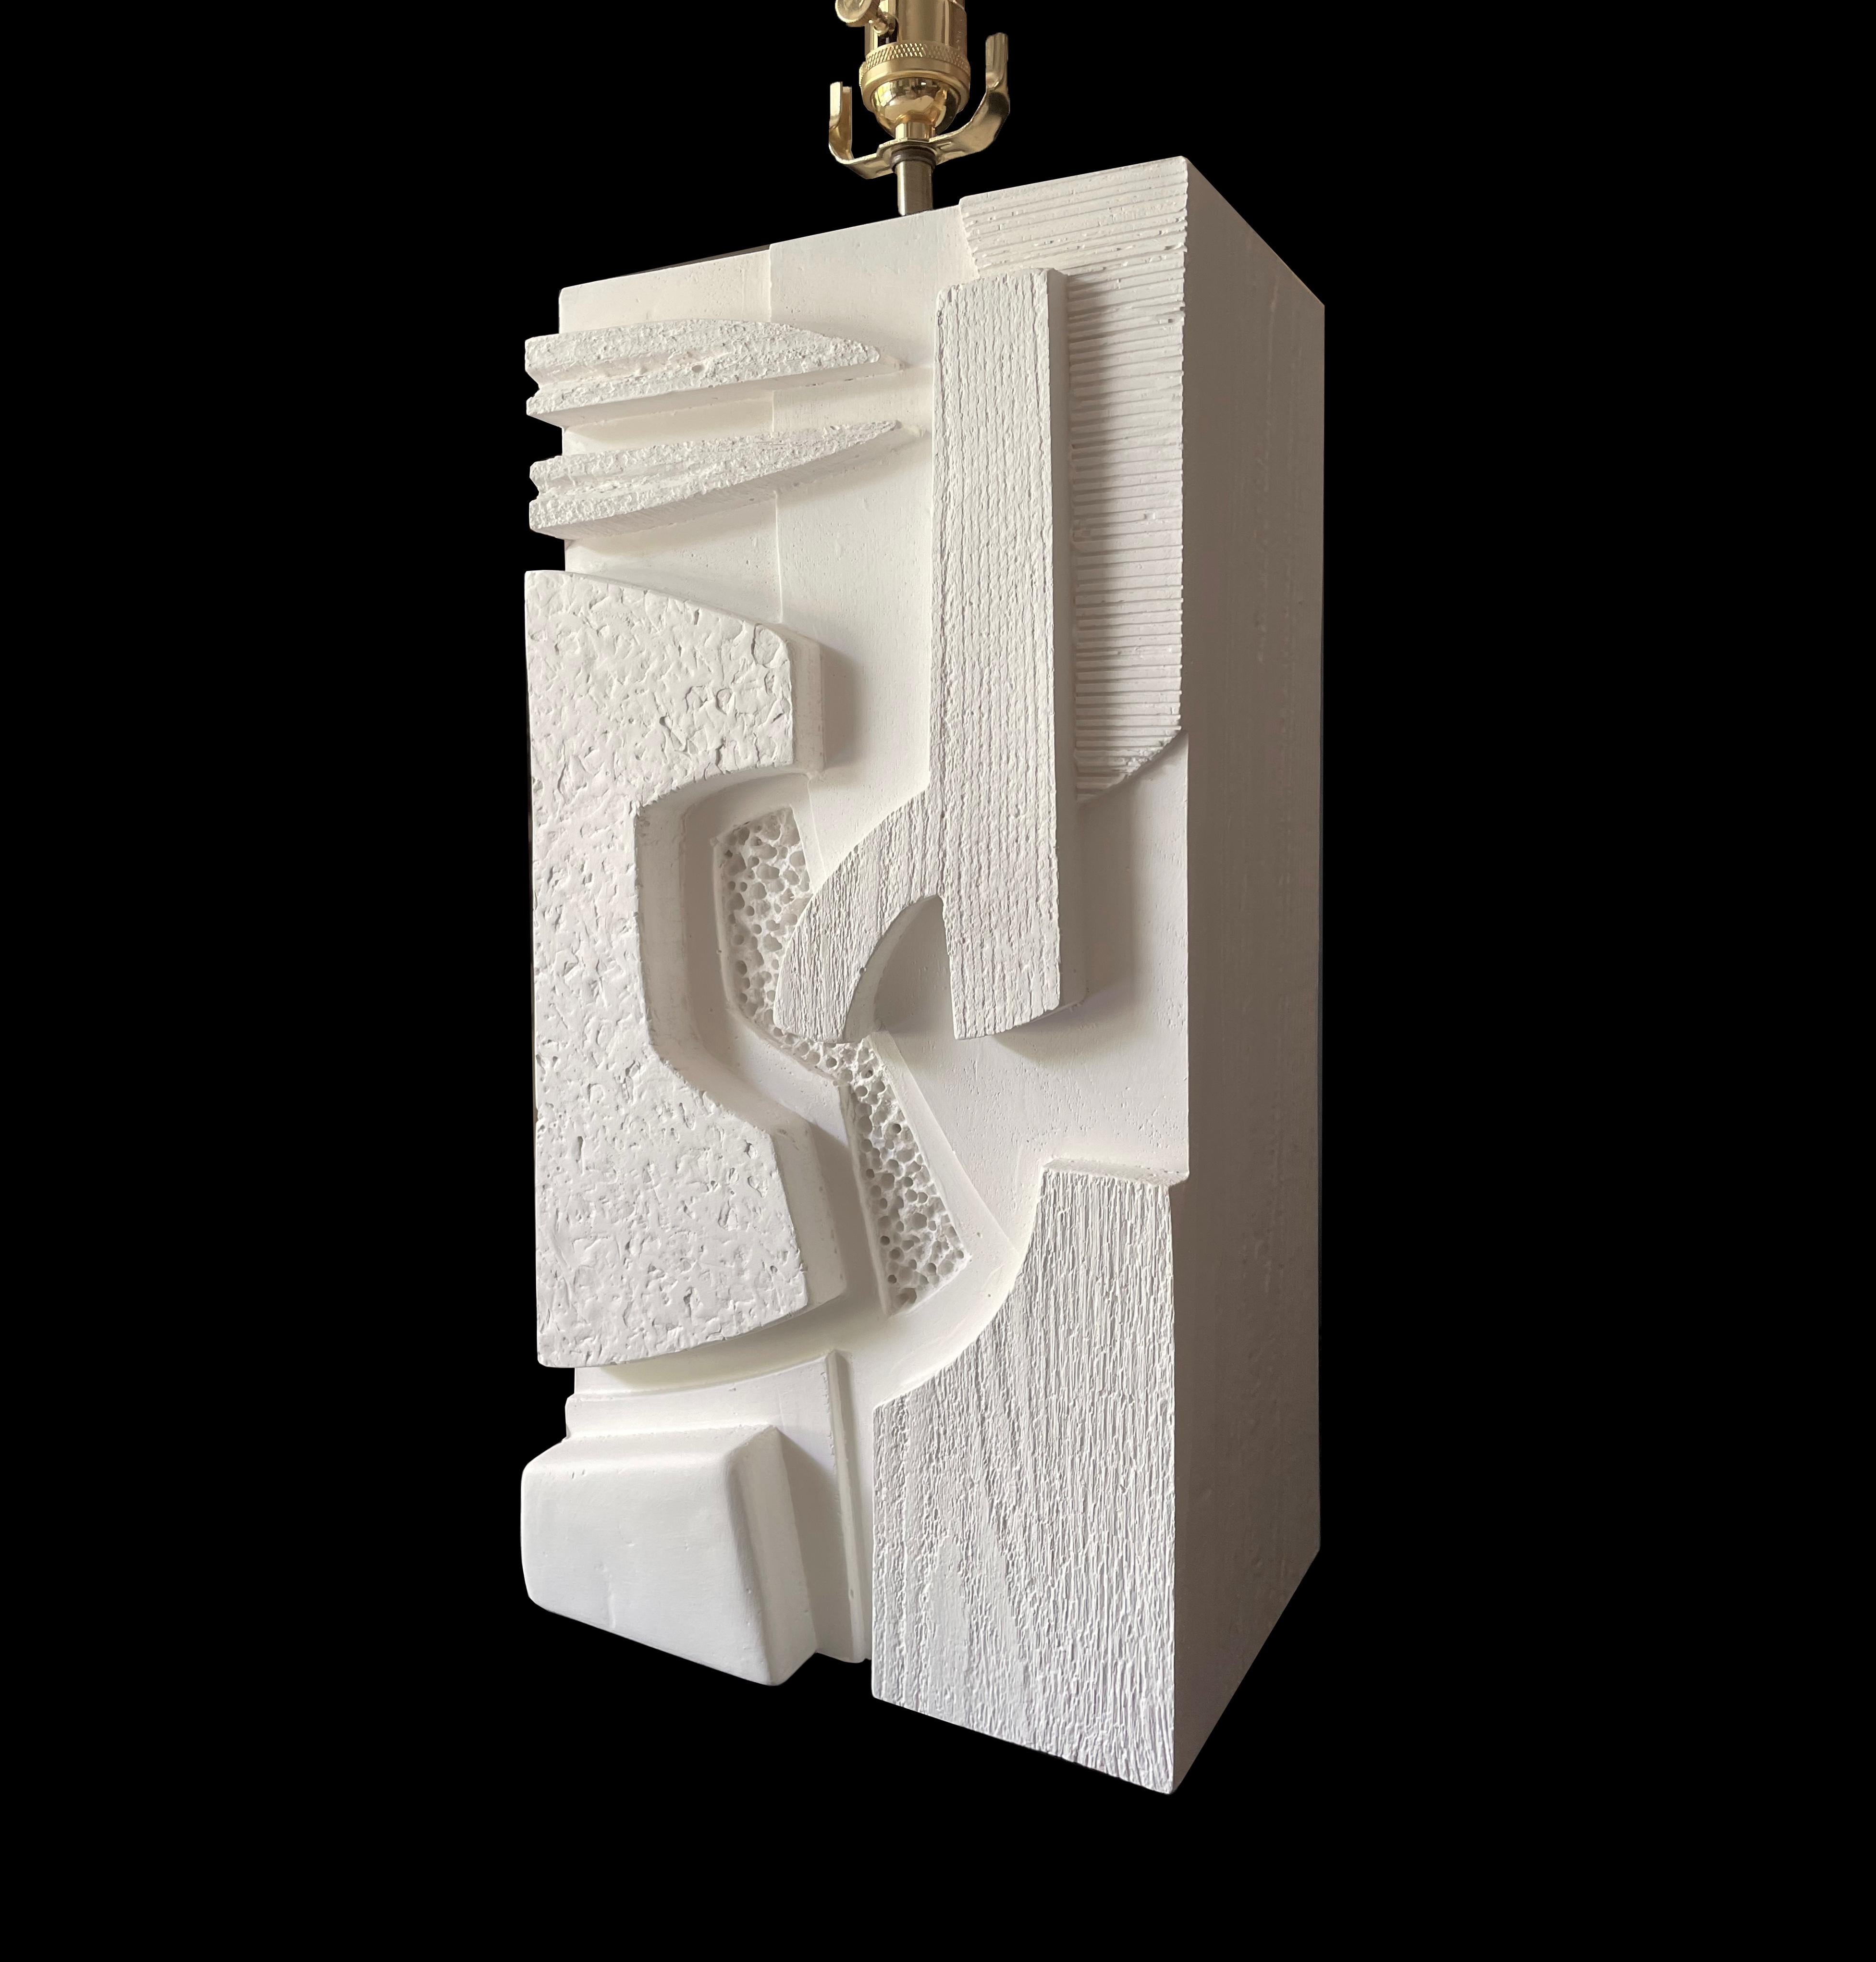 Pêle-Mêle Complementary Table Lamp 1 by Daniel Schneiger
One of a Kind.
Dimensions: D 15,3 x W 23 x H 45,8 cm.
Materials: Cast from gypsum plaster.

This lamp is part of a complementary pair inspired by the collages of Matisse, hence the name,